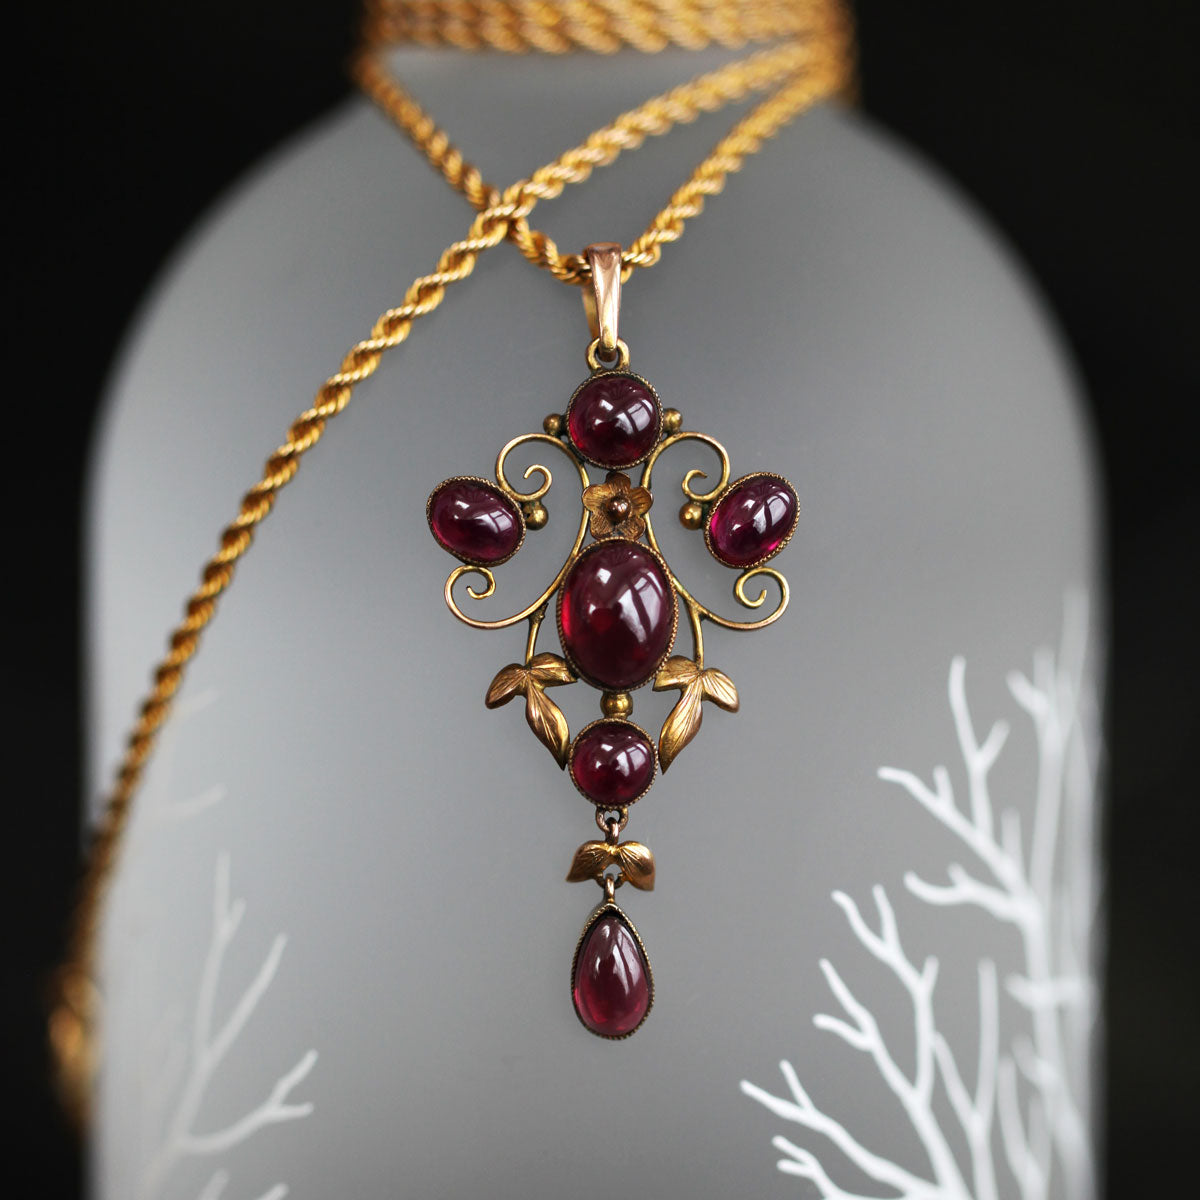 Art-Nouveau-9k-Pendant-with-cabouchons-garnets-on-14k-rope-chain